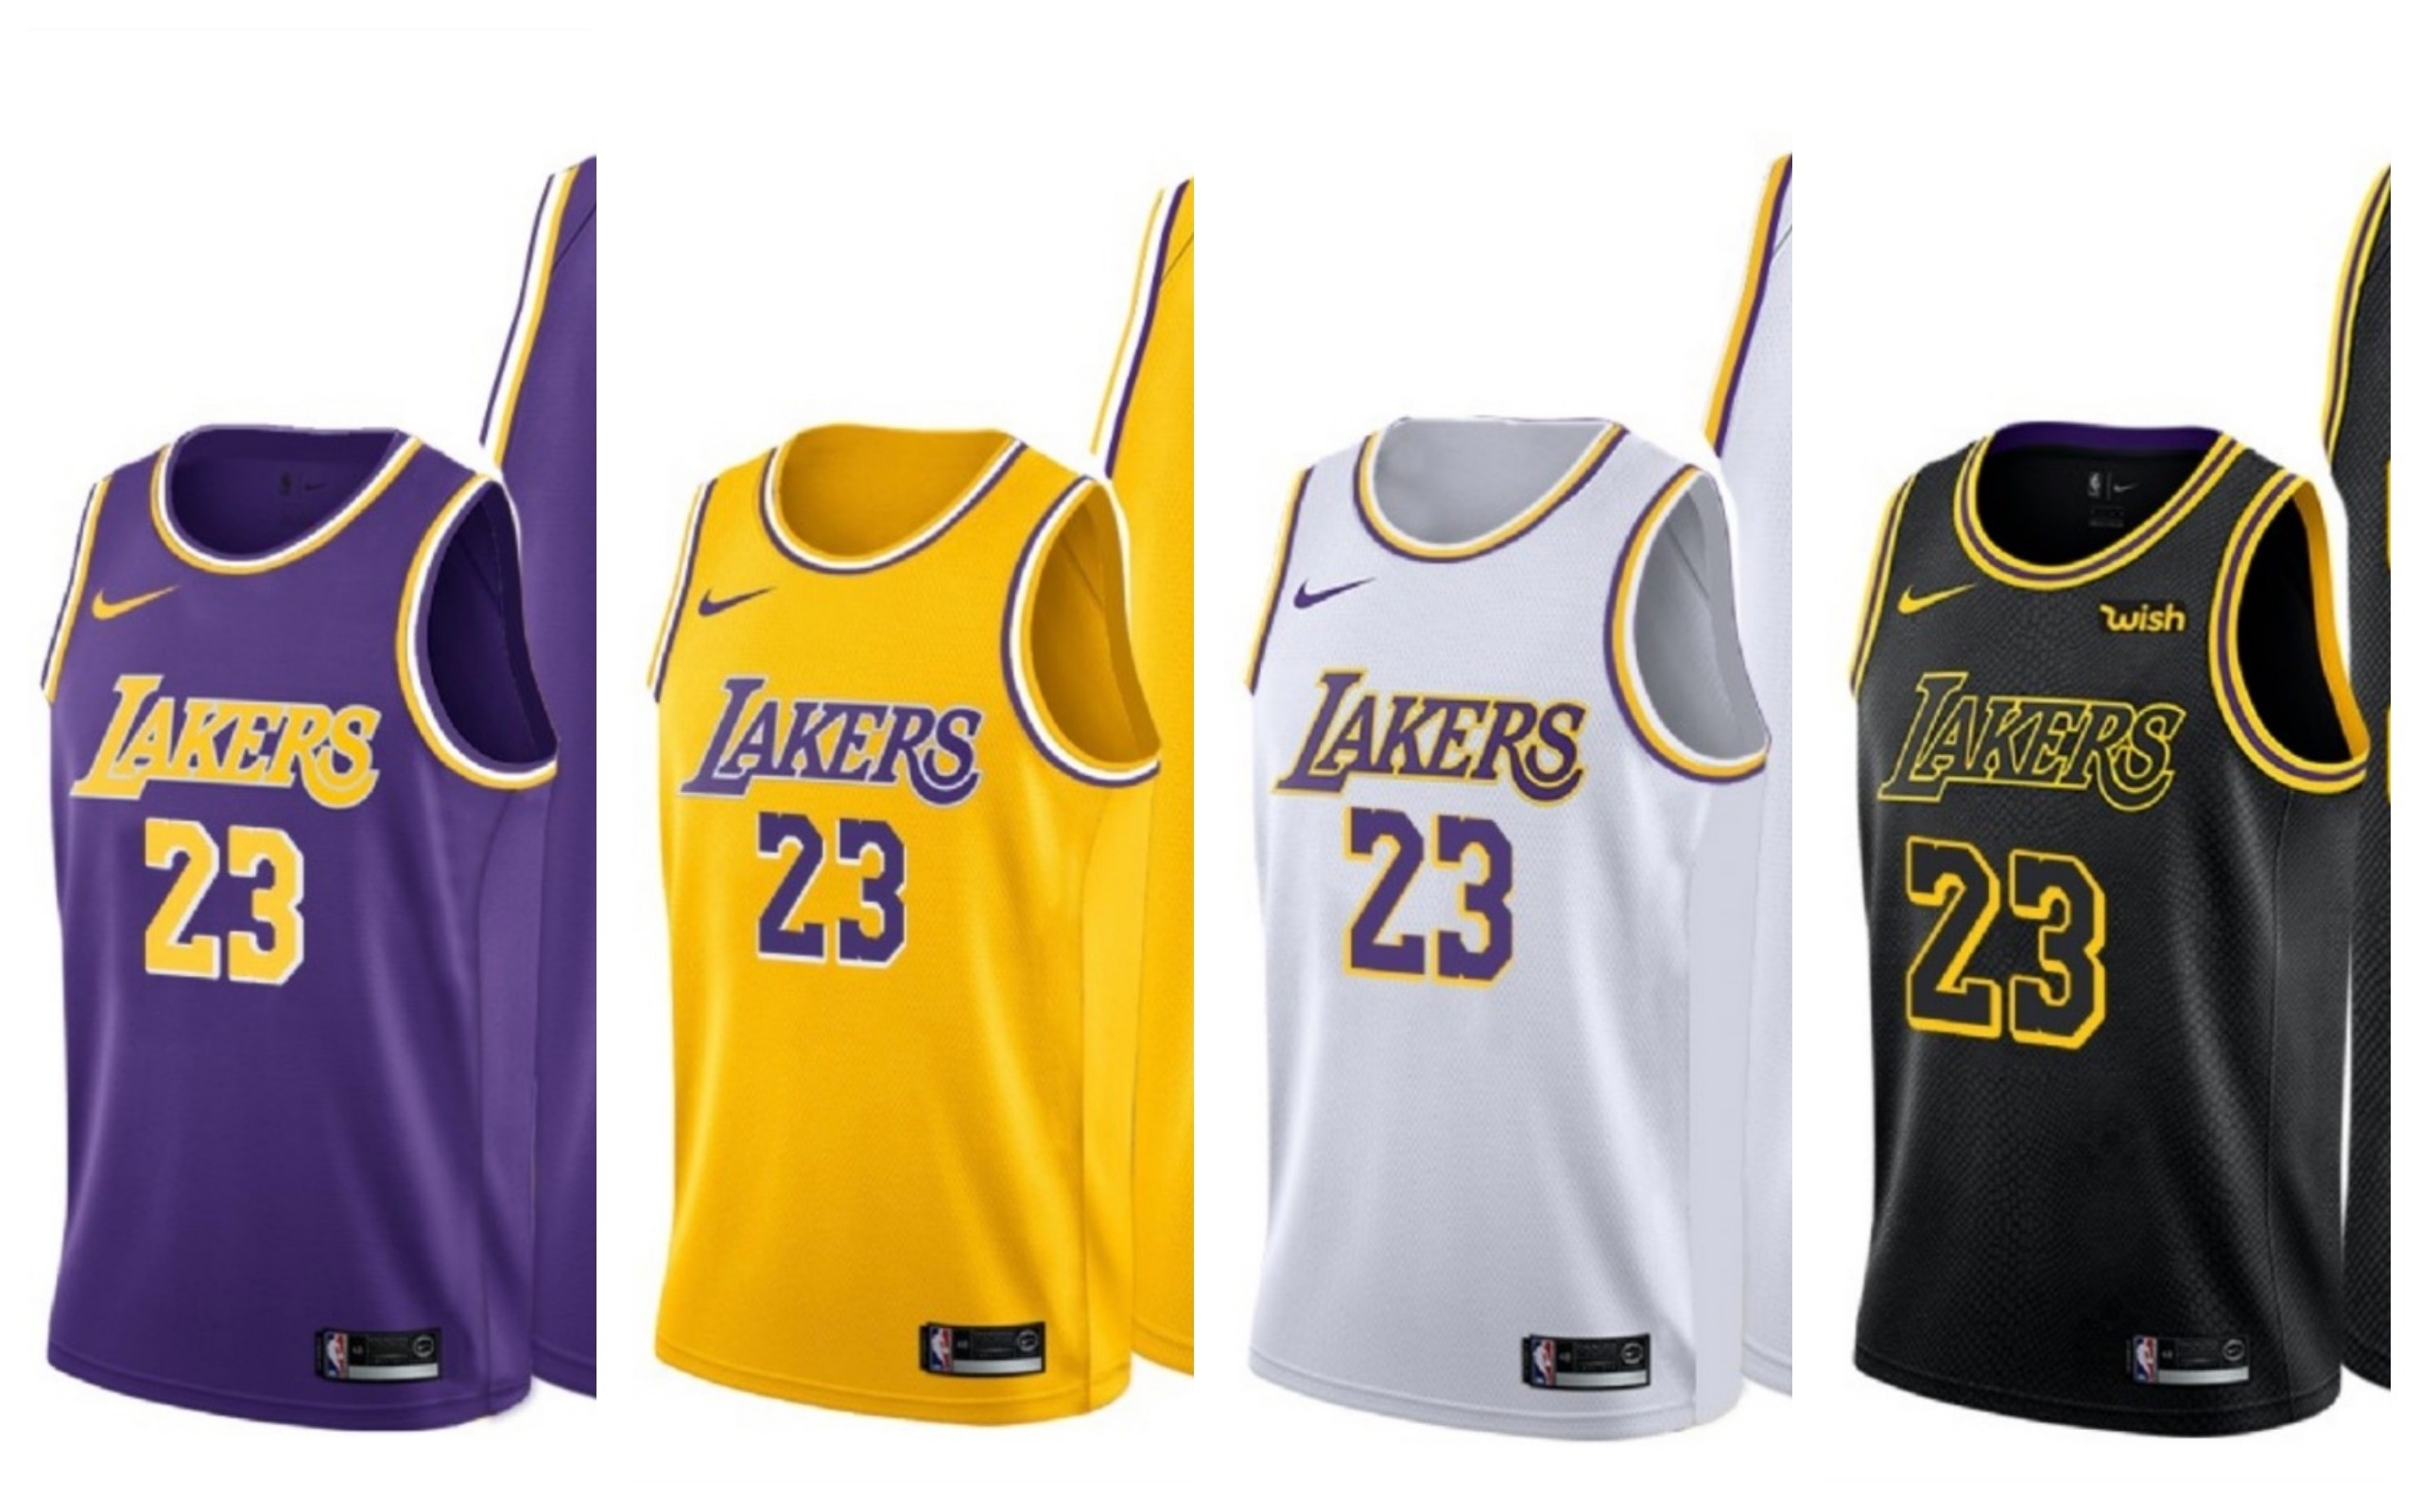 A sporting goods store accidentally leaked the Lakers' new uniforms